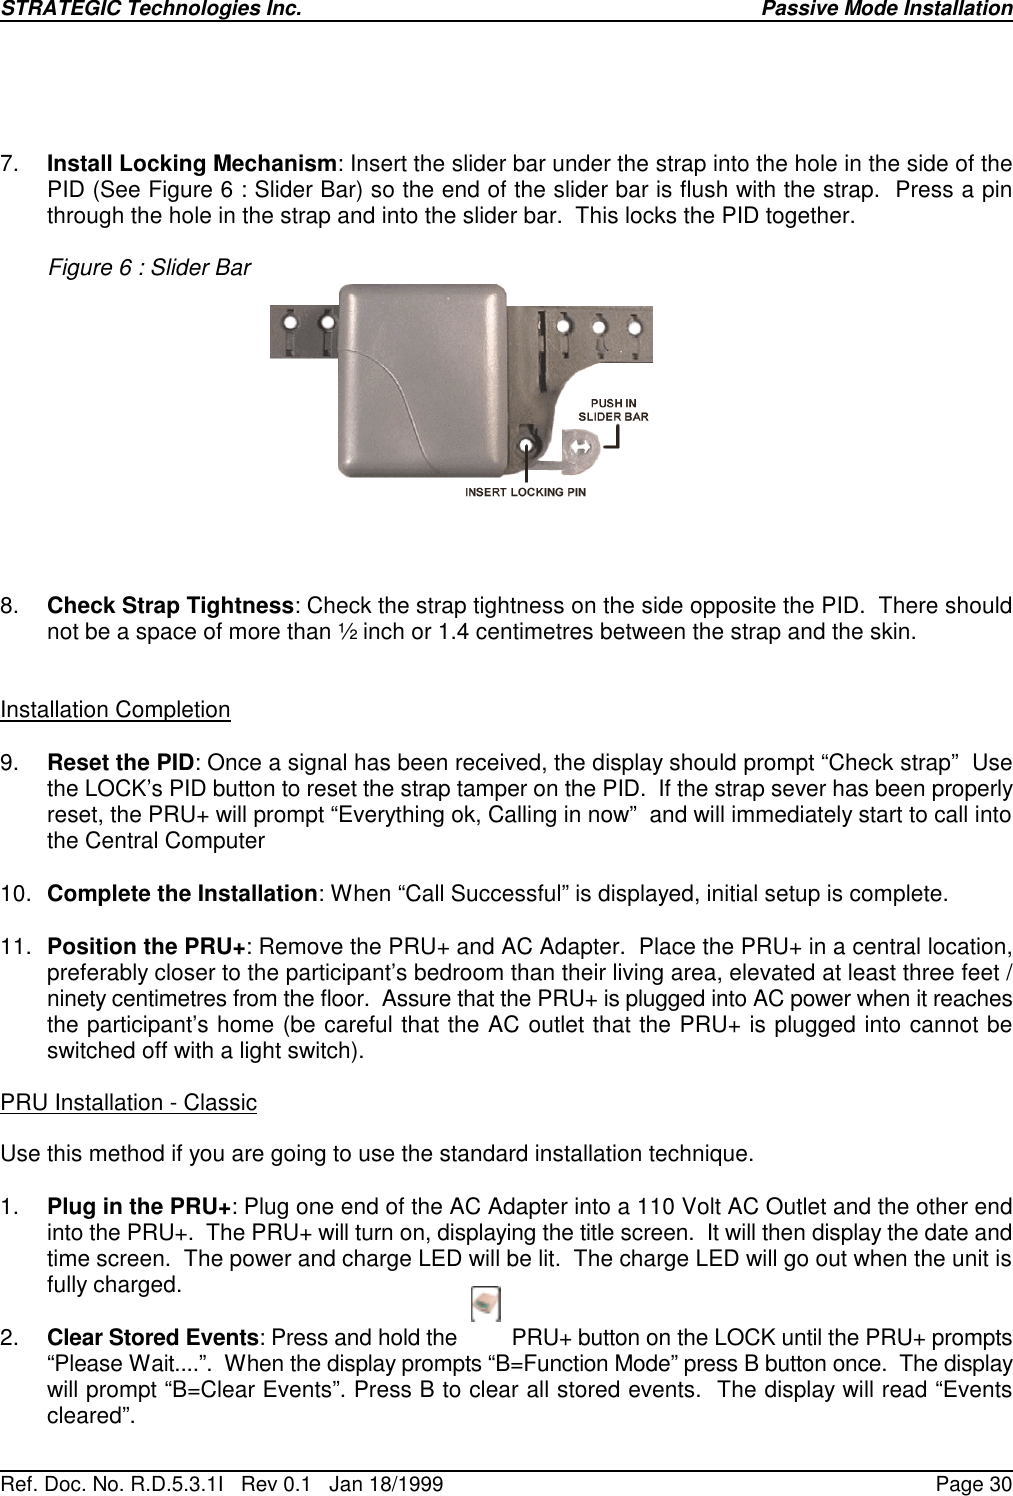 STRATEGIC Technologies Inc.Ref. Doc. No. R.D.5.3.1I   Rev 0.1   Jan 18/1999Passive Mode InstallationPage 307. Install Locking Mechanism: Insert the slider bar under the strap into the hole in the side of thePID (See Figure 6 : Slider Bar) so the end of the slider bar is flush with the strap.  Press a pinthrough the hole in the strap and into the slider bar.  This locks the PID together.Figure 6 : Slider Bar8. Check Strap Tightness: Check the strap tightness on the side opposite the PID.  There shouldnot be a space of more than ½ inch or 1.4 centimetres between the strap and the skin.Installation Completion9. Reset the PID: Once a signal has been received, the display should prompt “Check strap”  Usethe LOCK’s PID button to reset the strap tamper on the PID.  If the strap sever has been properlyreset, the PRU+ will prompt “Everything ok, Calling in now”  and will immediately start to call intothe Central Computer10. Complete the Installation: When “Call Successful” is displayed, initial setup is complete.11. Position the PRU+: Remove the PRU+ and AC Adapter.  Place the PRU+ in a central location,preferably closer to the participant’s bedroom than their living area, elevated at least three feet /ninety centimetres from the floor.  Assure that the PRU+ is plugged into AC power when it reachesthe participant’s home (be careful that the AC outlet that the PRU+ is plugged into cannot beswitched off with a light switch).PRU Installation - ClassicUse this method if you are going to use the standard installation technique.1. Plug in the PRU+: Plug one end of the AC Adapter into a 110 Volt AC Outlet and the other endinto the PRU+.  The PRU+ will turn on, displaying the title screen.  It will then display the date andtime screen.  The power and charge LED will be lit.  The charge LED will go out when the unit isfully charged.2. Clear Stored Events: Press and hold the         PRU+ button on the LOCK until the PRU+ prompts“Please Wait....”.  When the display prompts “B=Function Mode” press B button once.  The displaywill prompt “B=Clear Events”. Press B to clear all stored events.  The display will read “Eventscleared”.